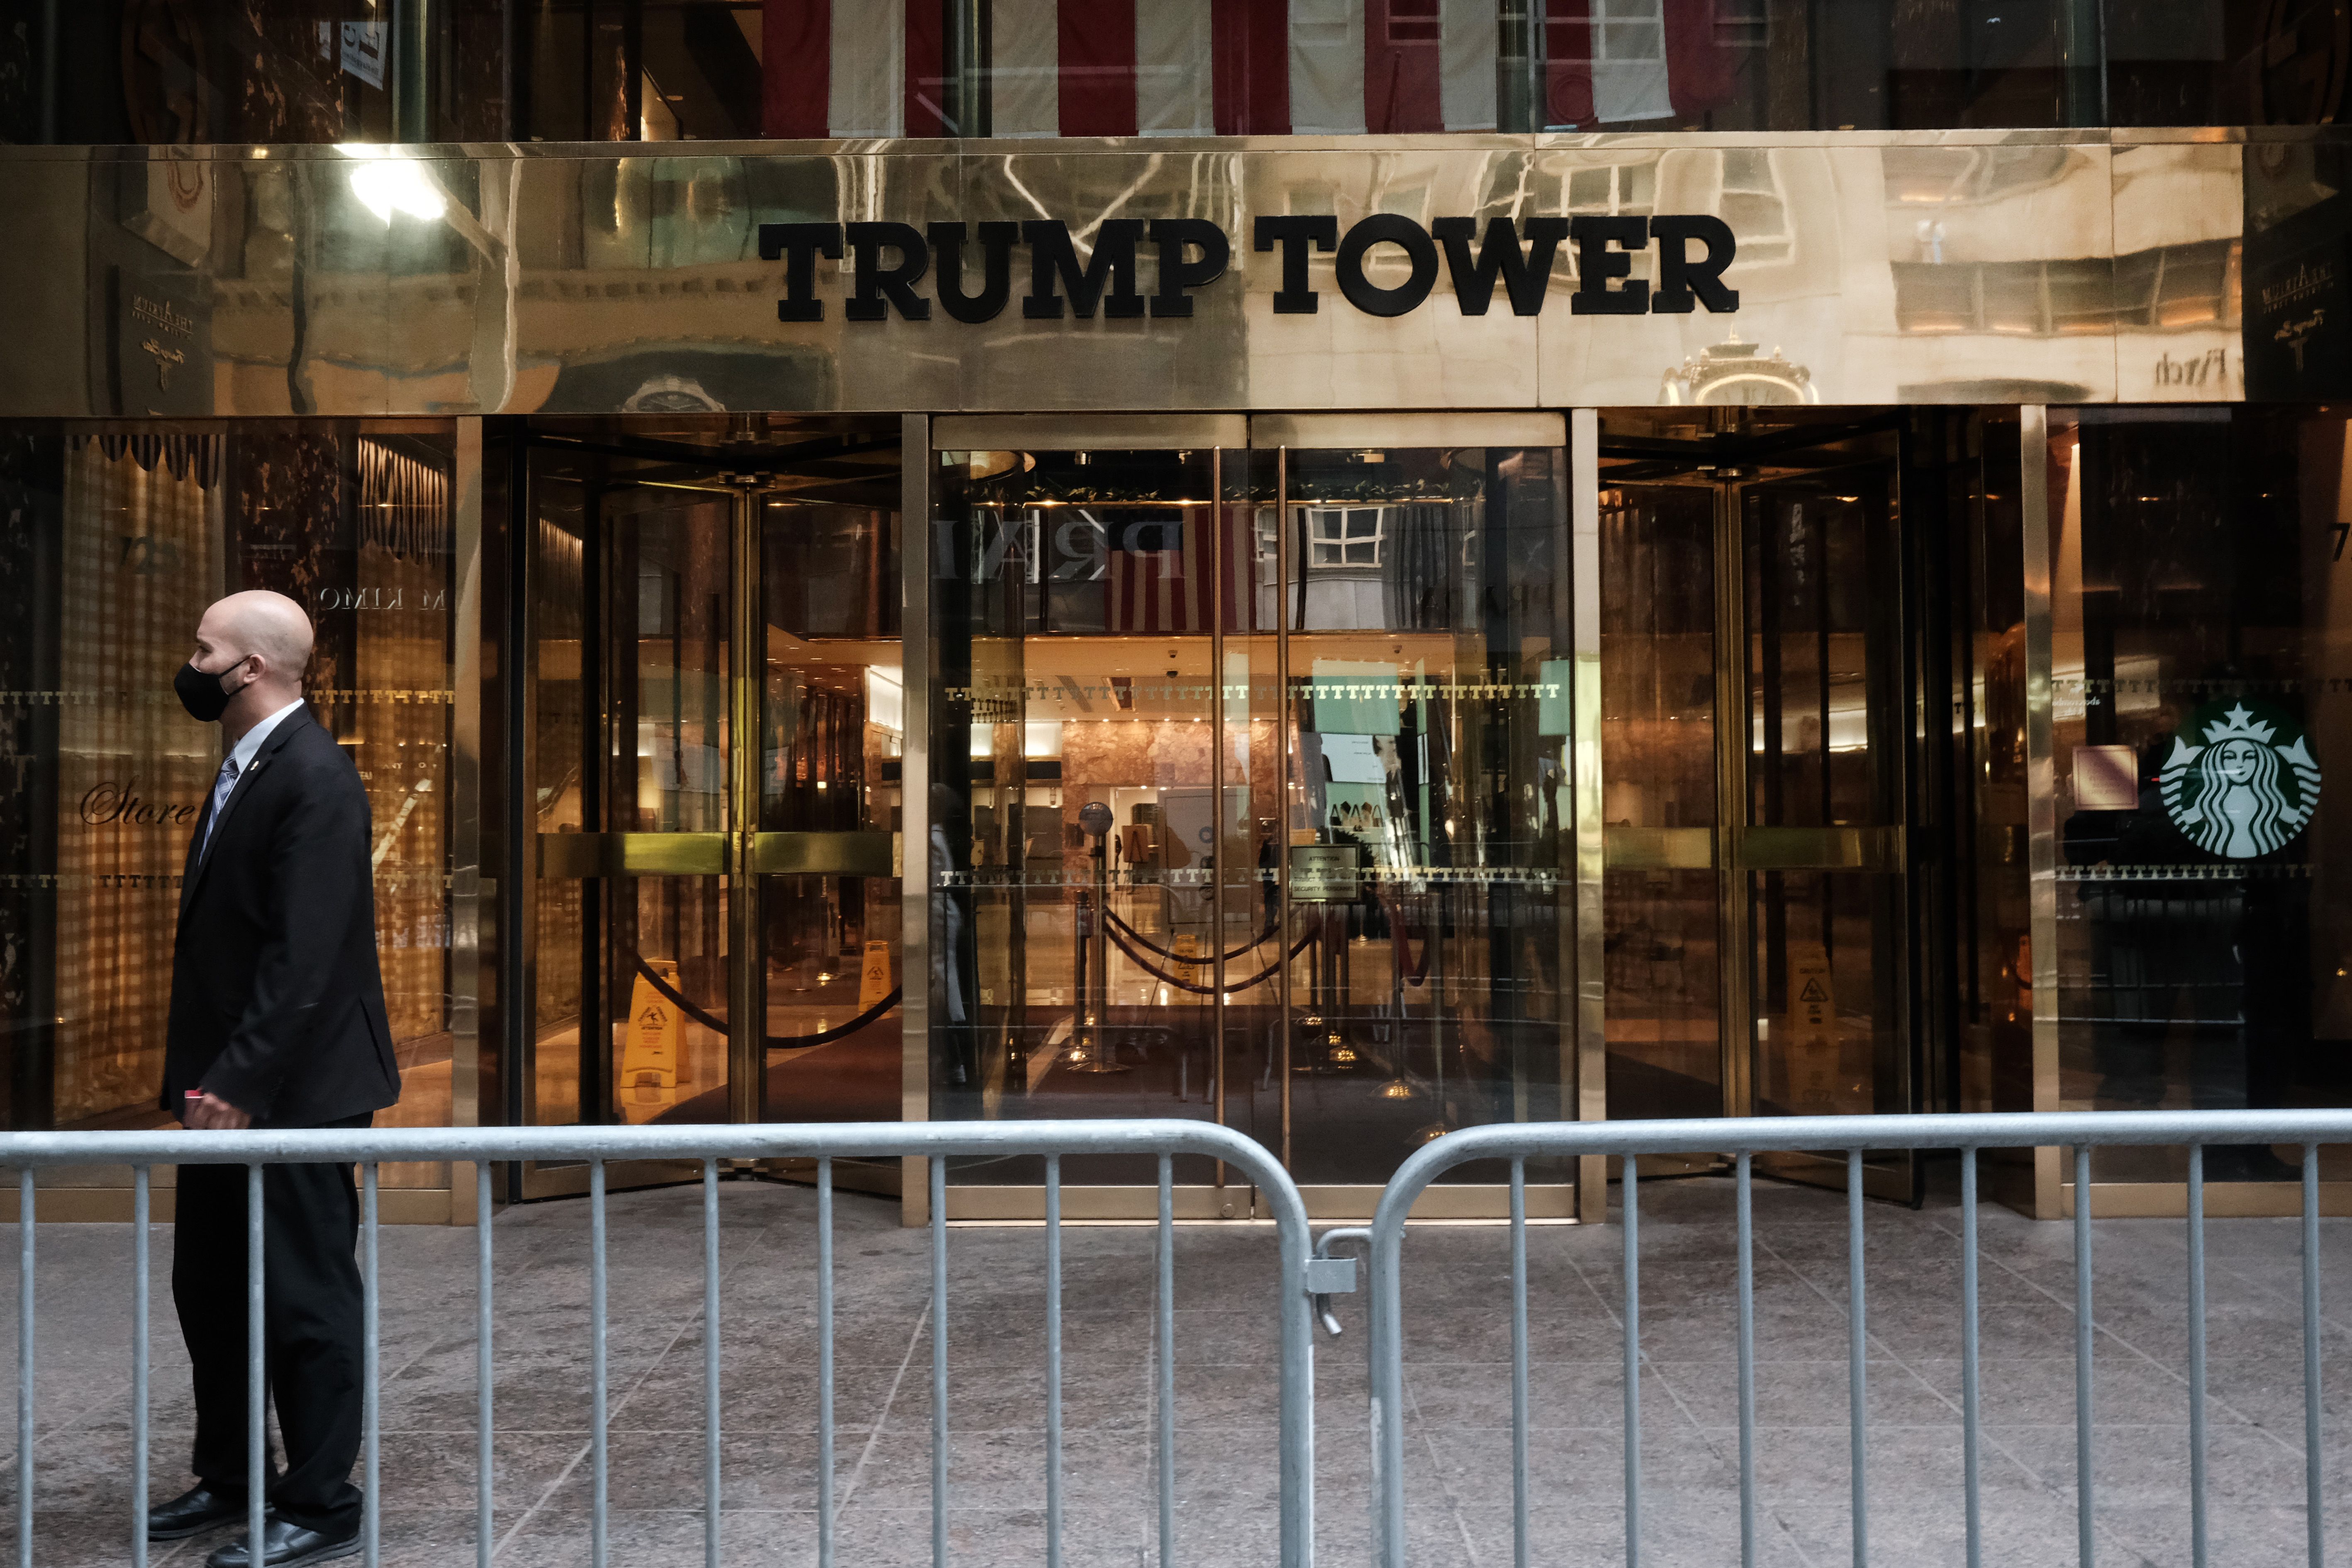 The entrance to Trump Tower.